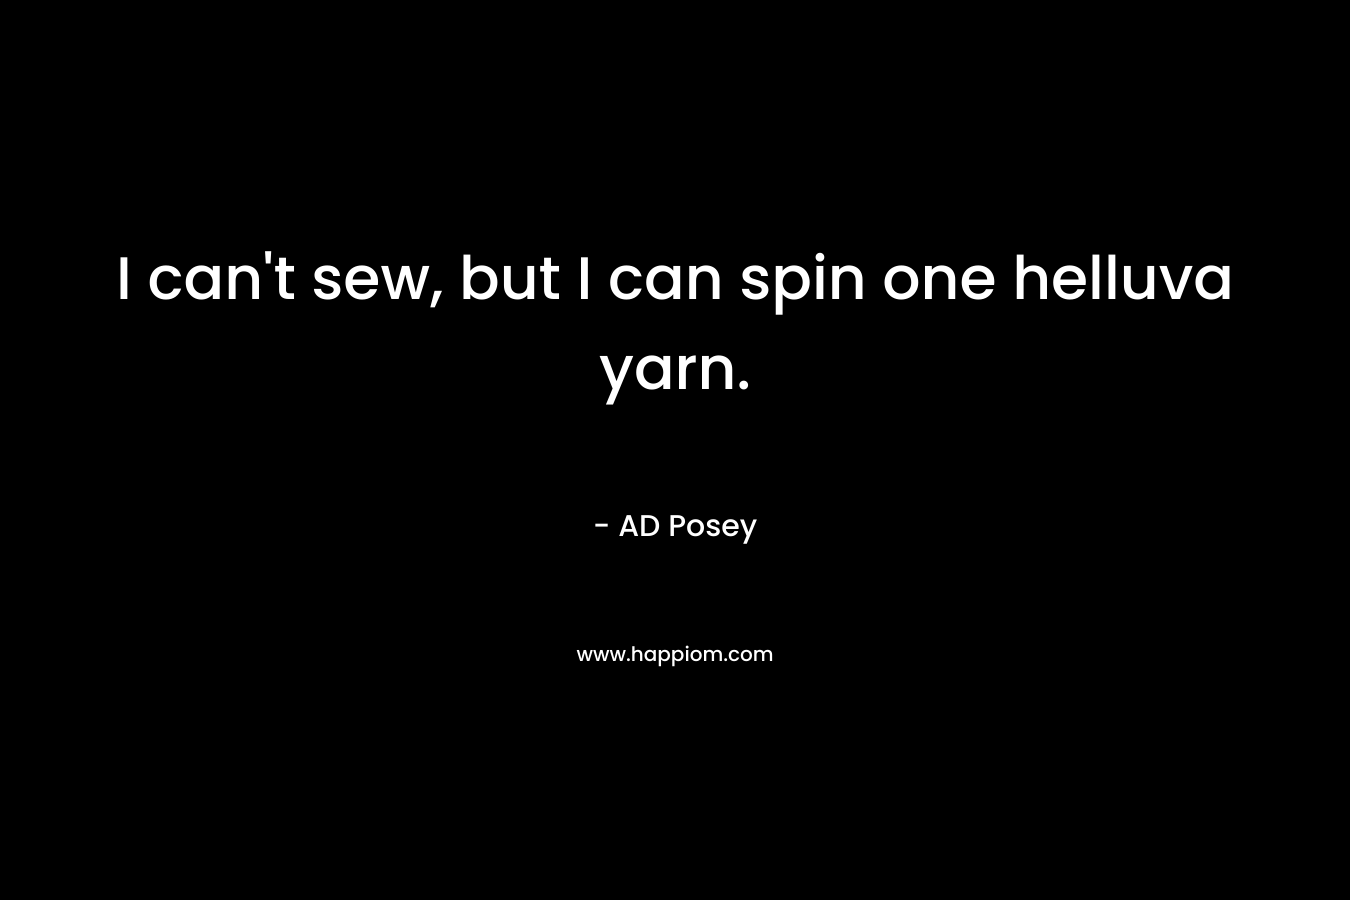 I can't sew, but I can spin one helluva yarn.